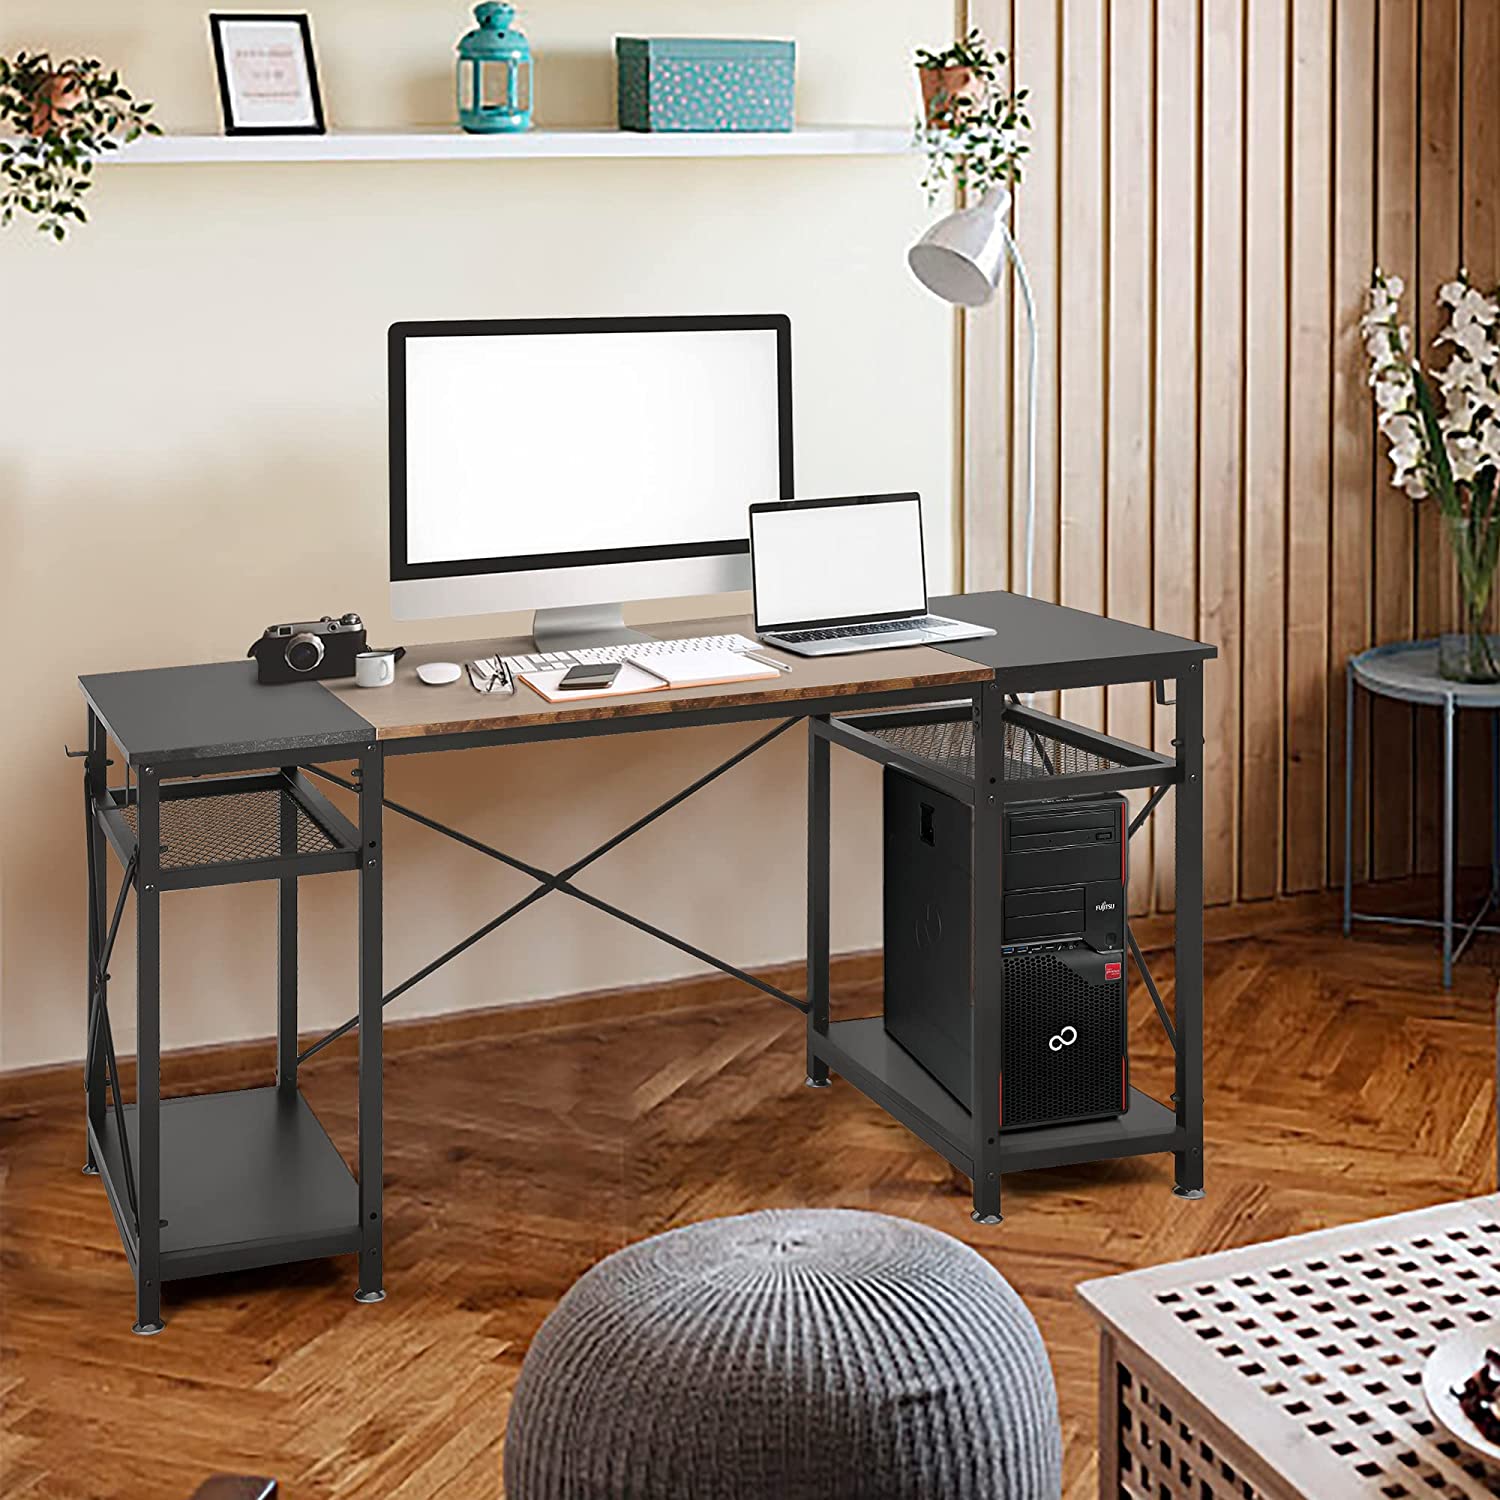 Spacious 47.2" Computer Desk with Storage Shelves, Hooks, and CPU Stand - Ideal Home Office Desk for Study and Work, Stylish Black Design